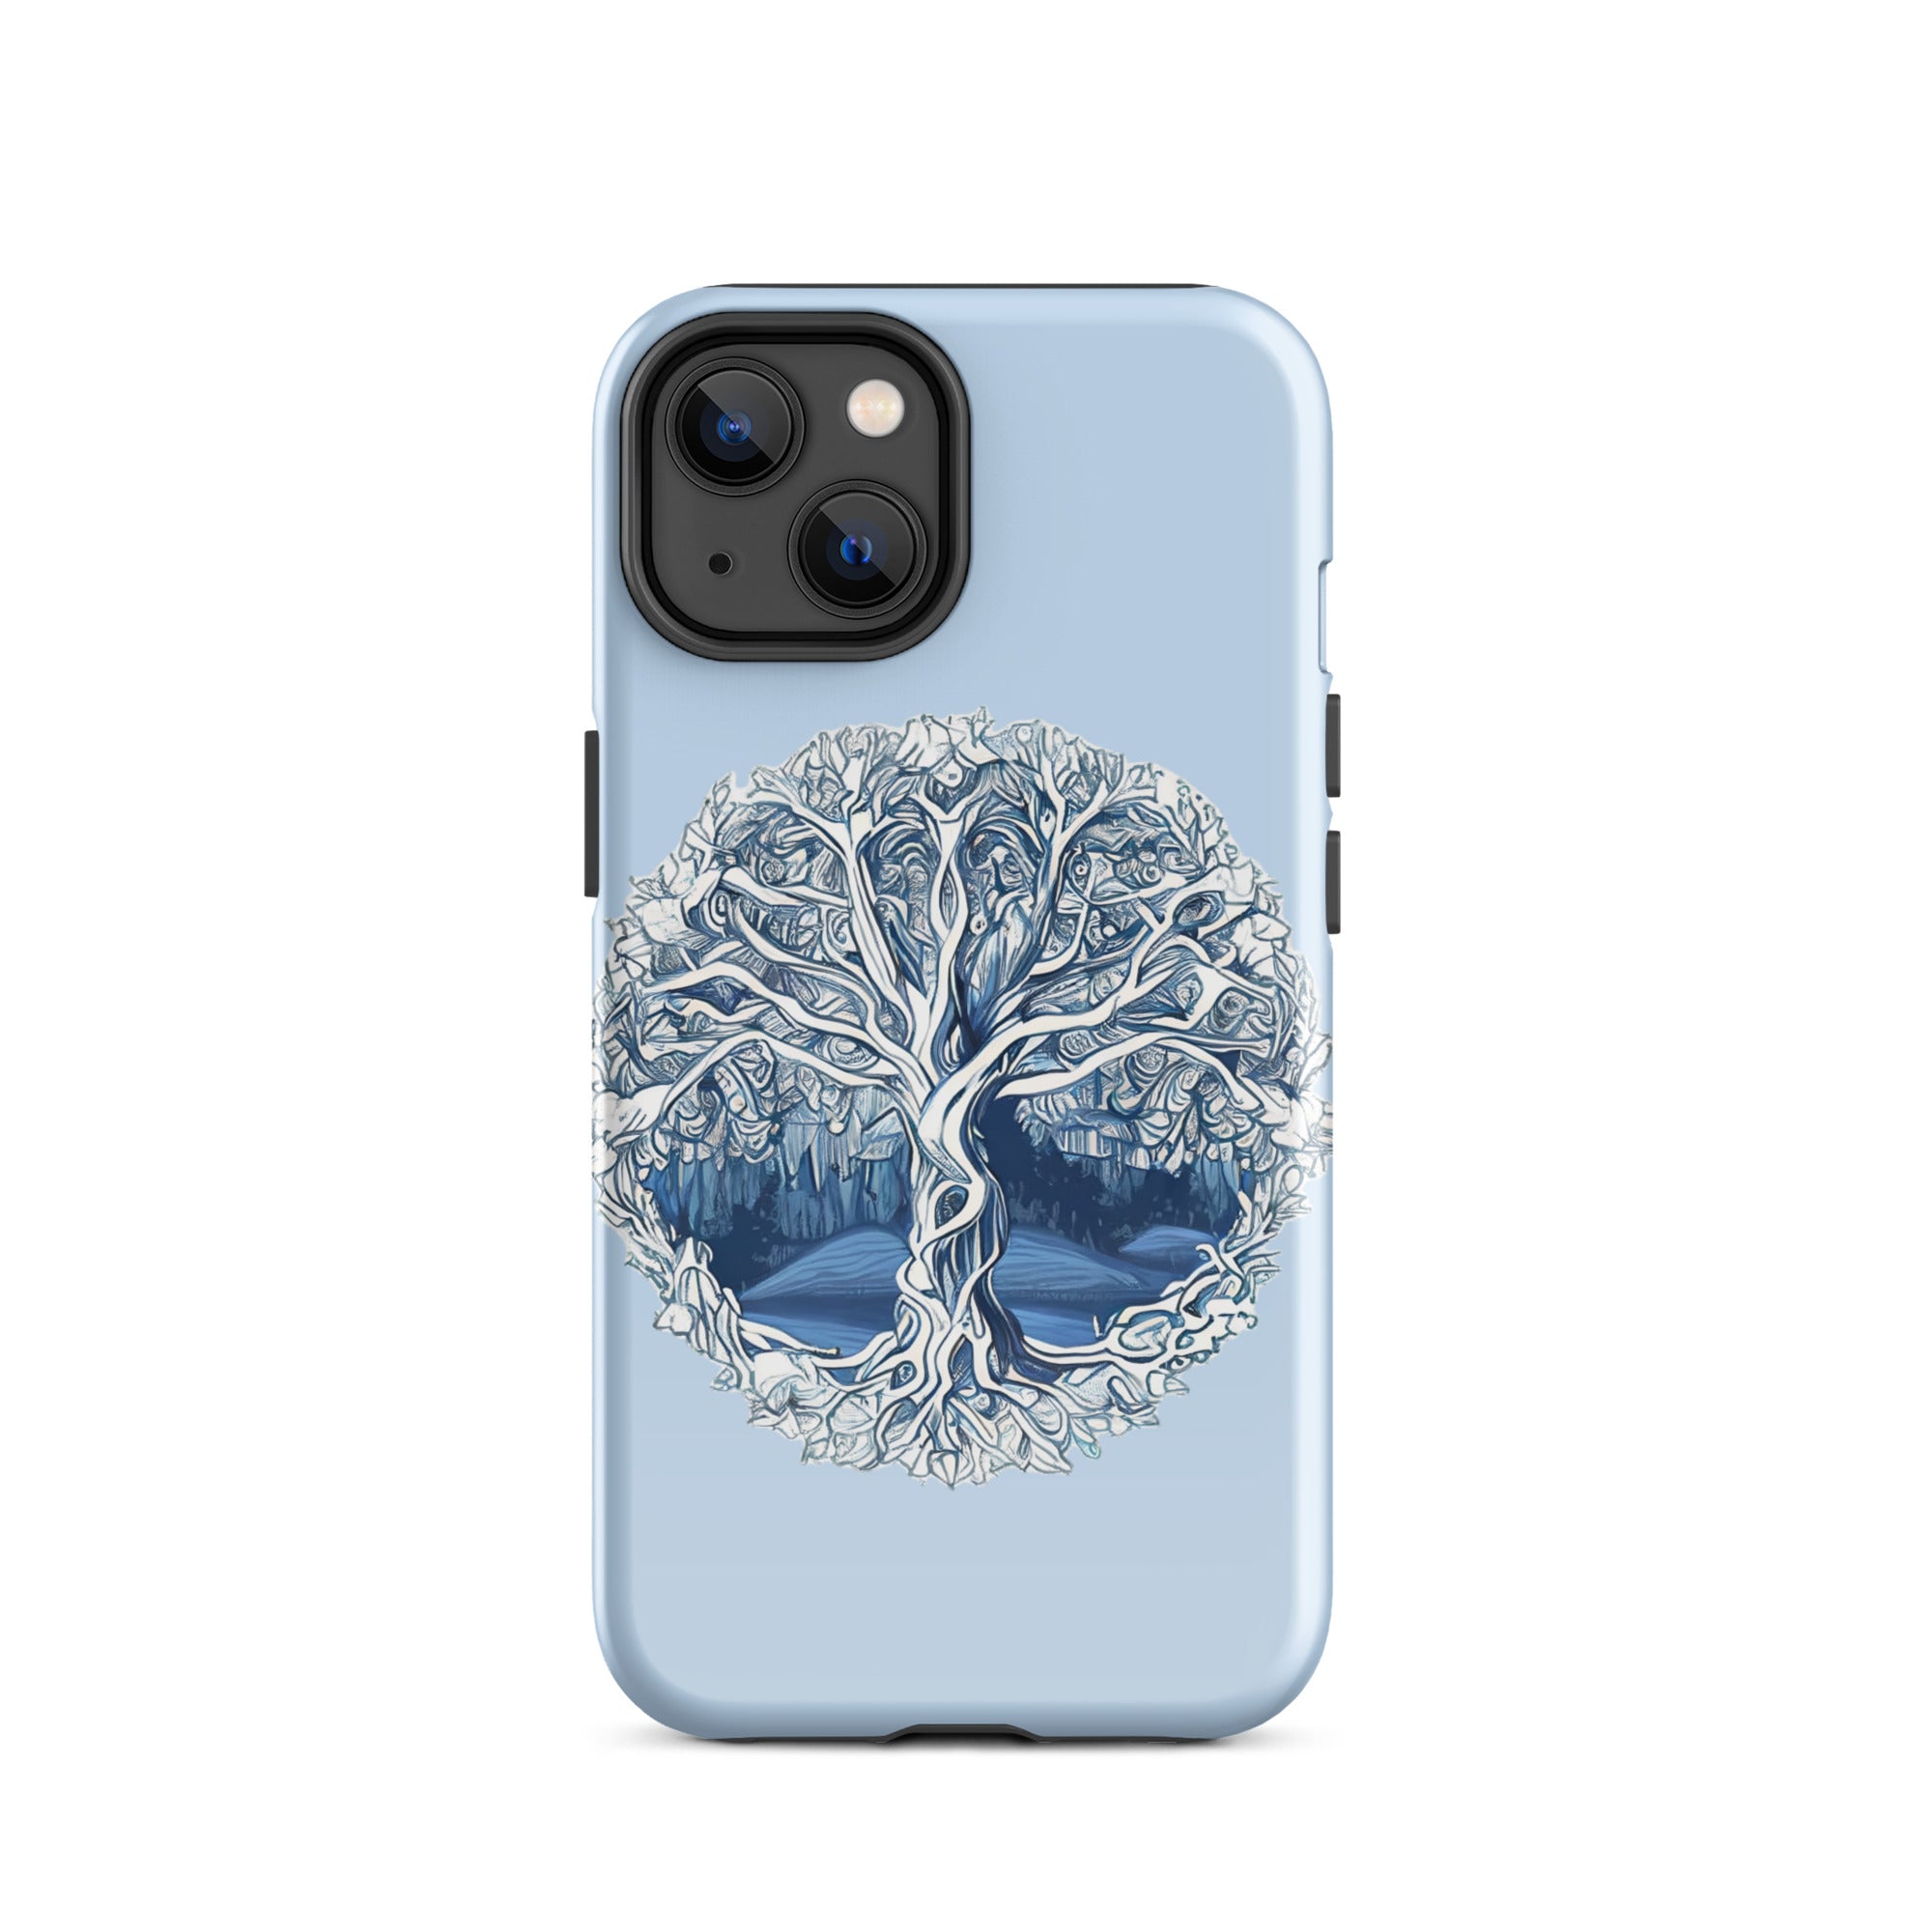 tough-case-for-iphone-glossy-iphone-14-front-656e0a37131f3.jpg